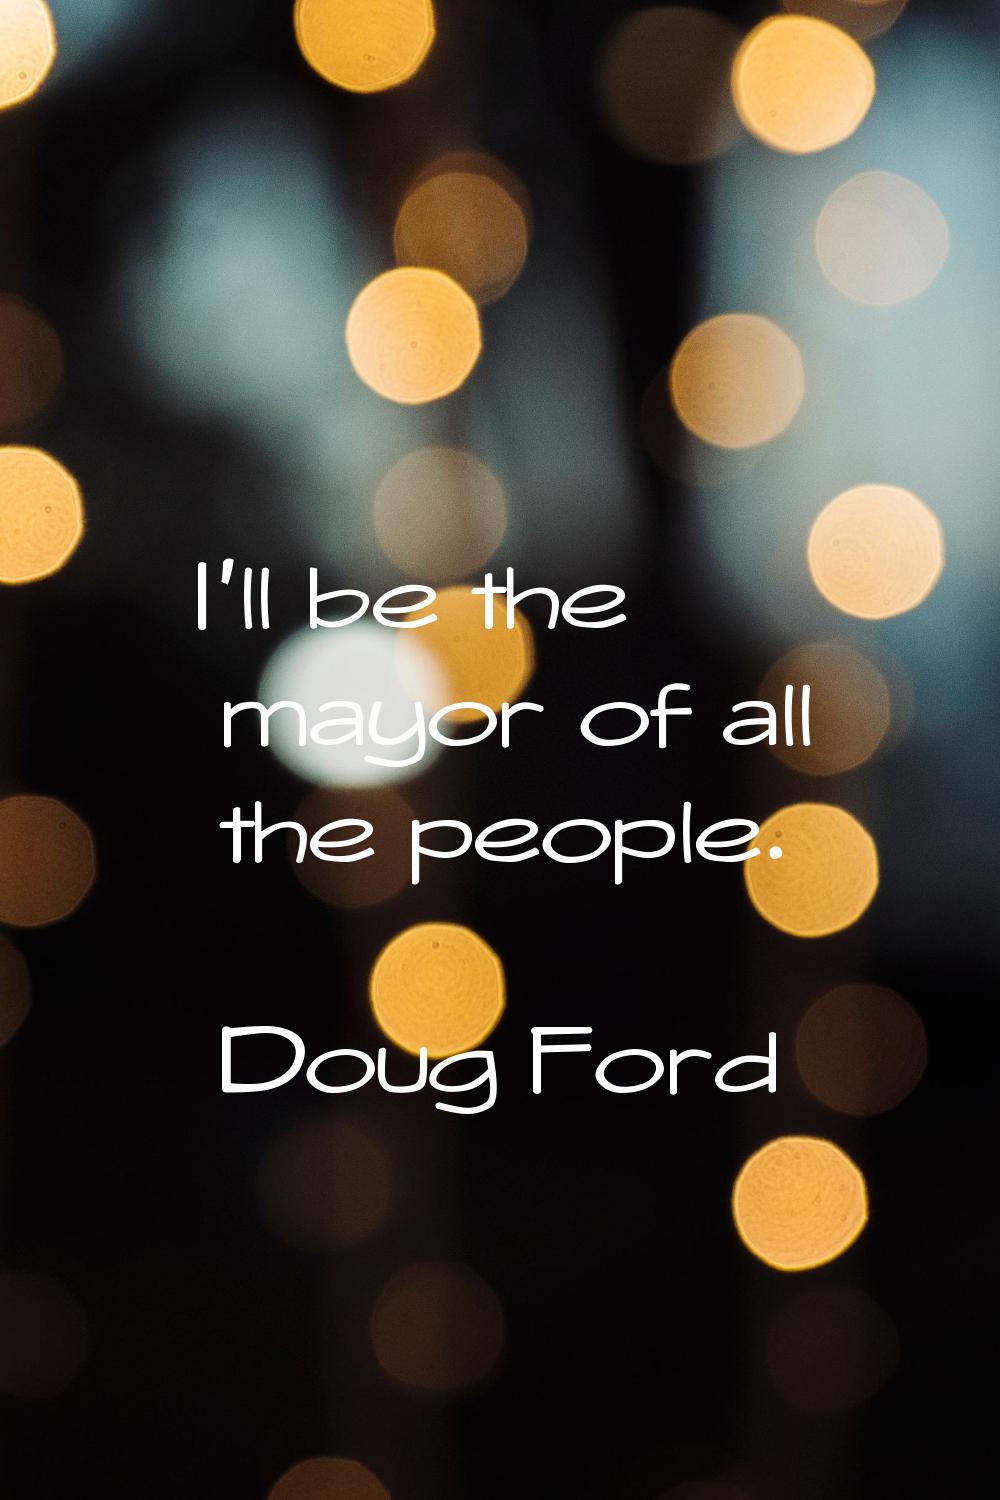 I'll be the mayor of all the people.